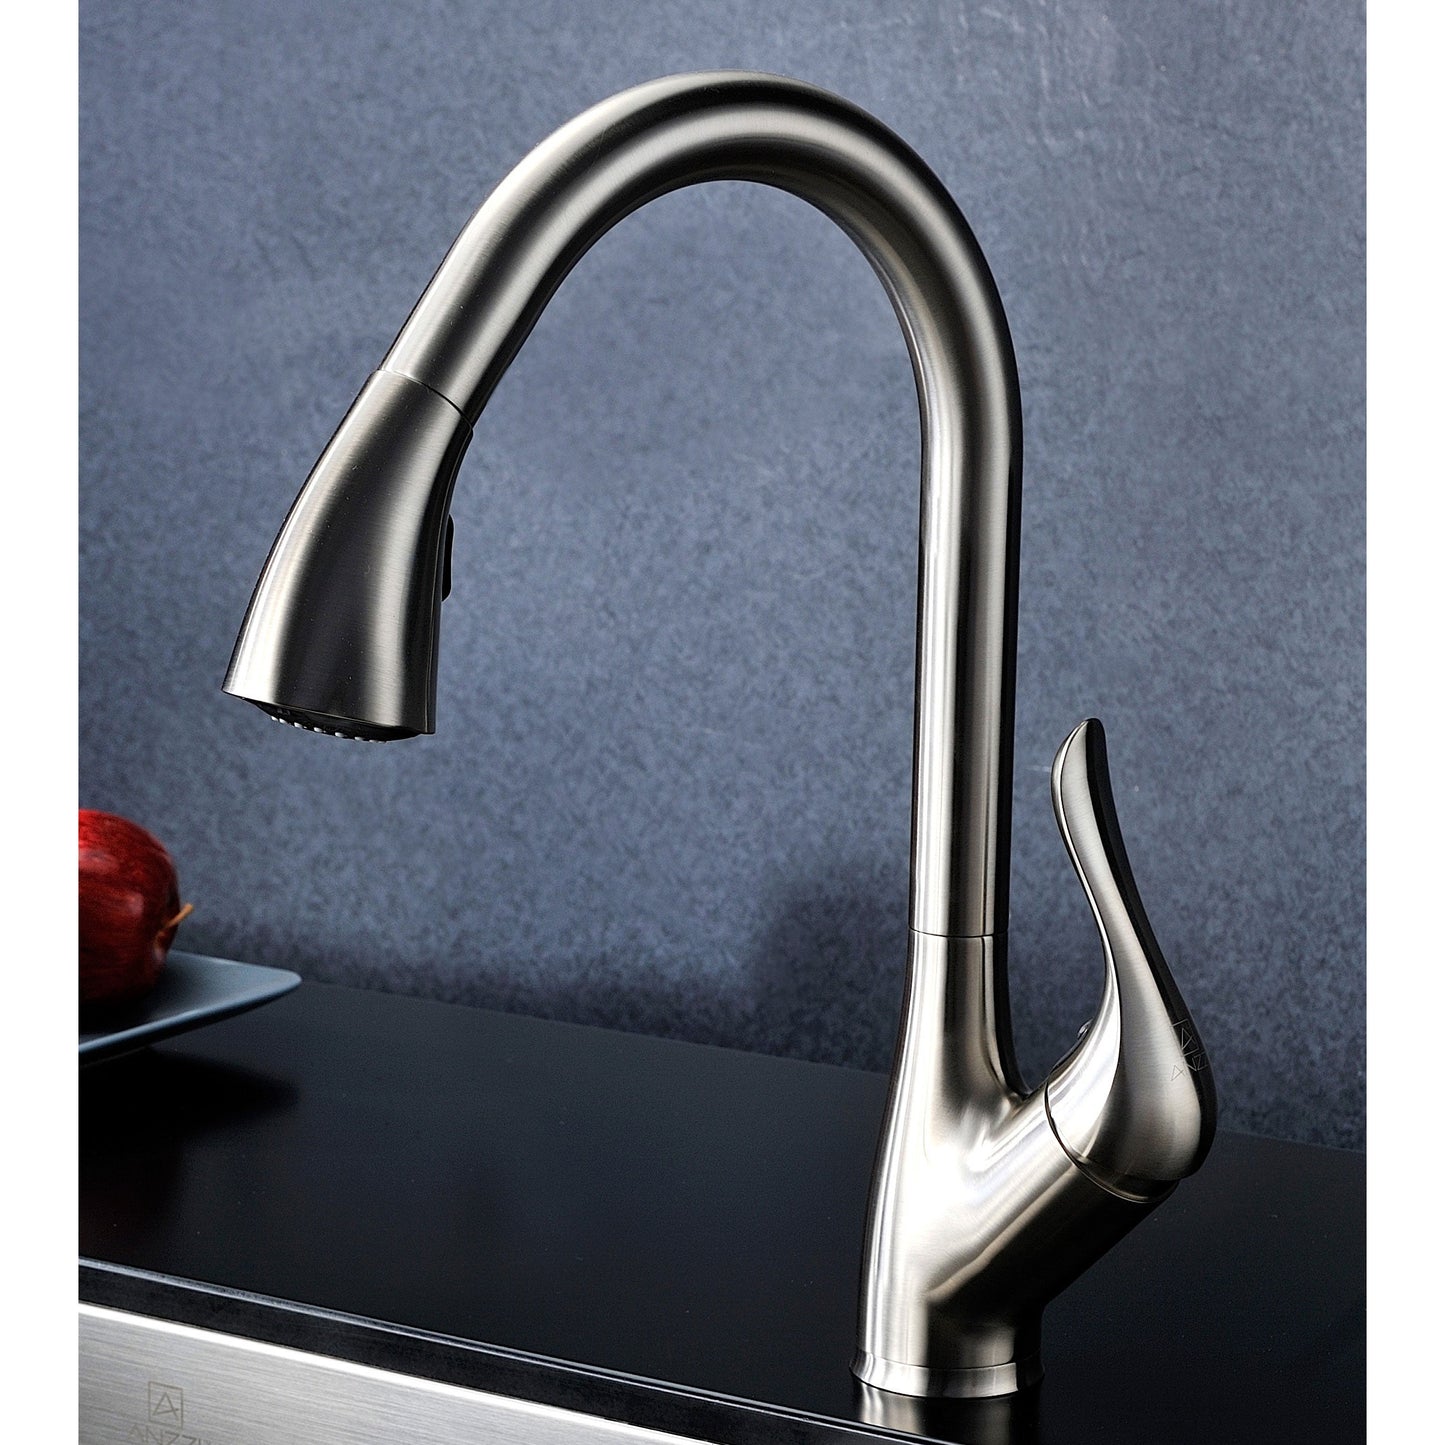 ANZZI Elysian Series 36" Double Basin 60/40 Stainless Steel Farmhouse Kitchen Sink With Strainer and Brushed Nickel Accent Faucet